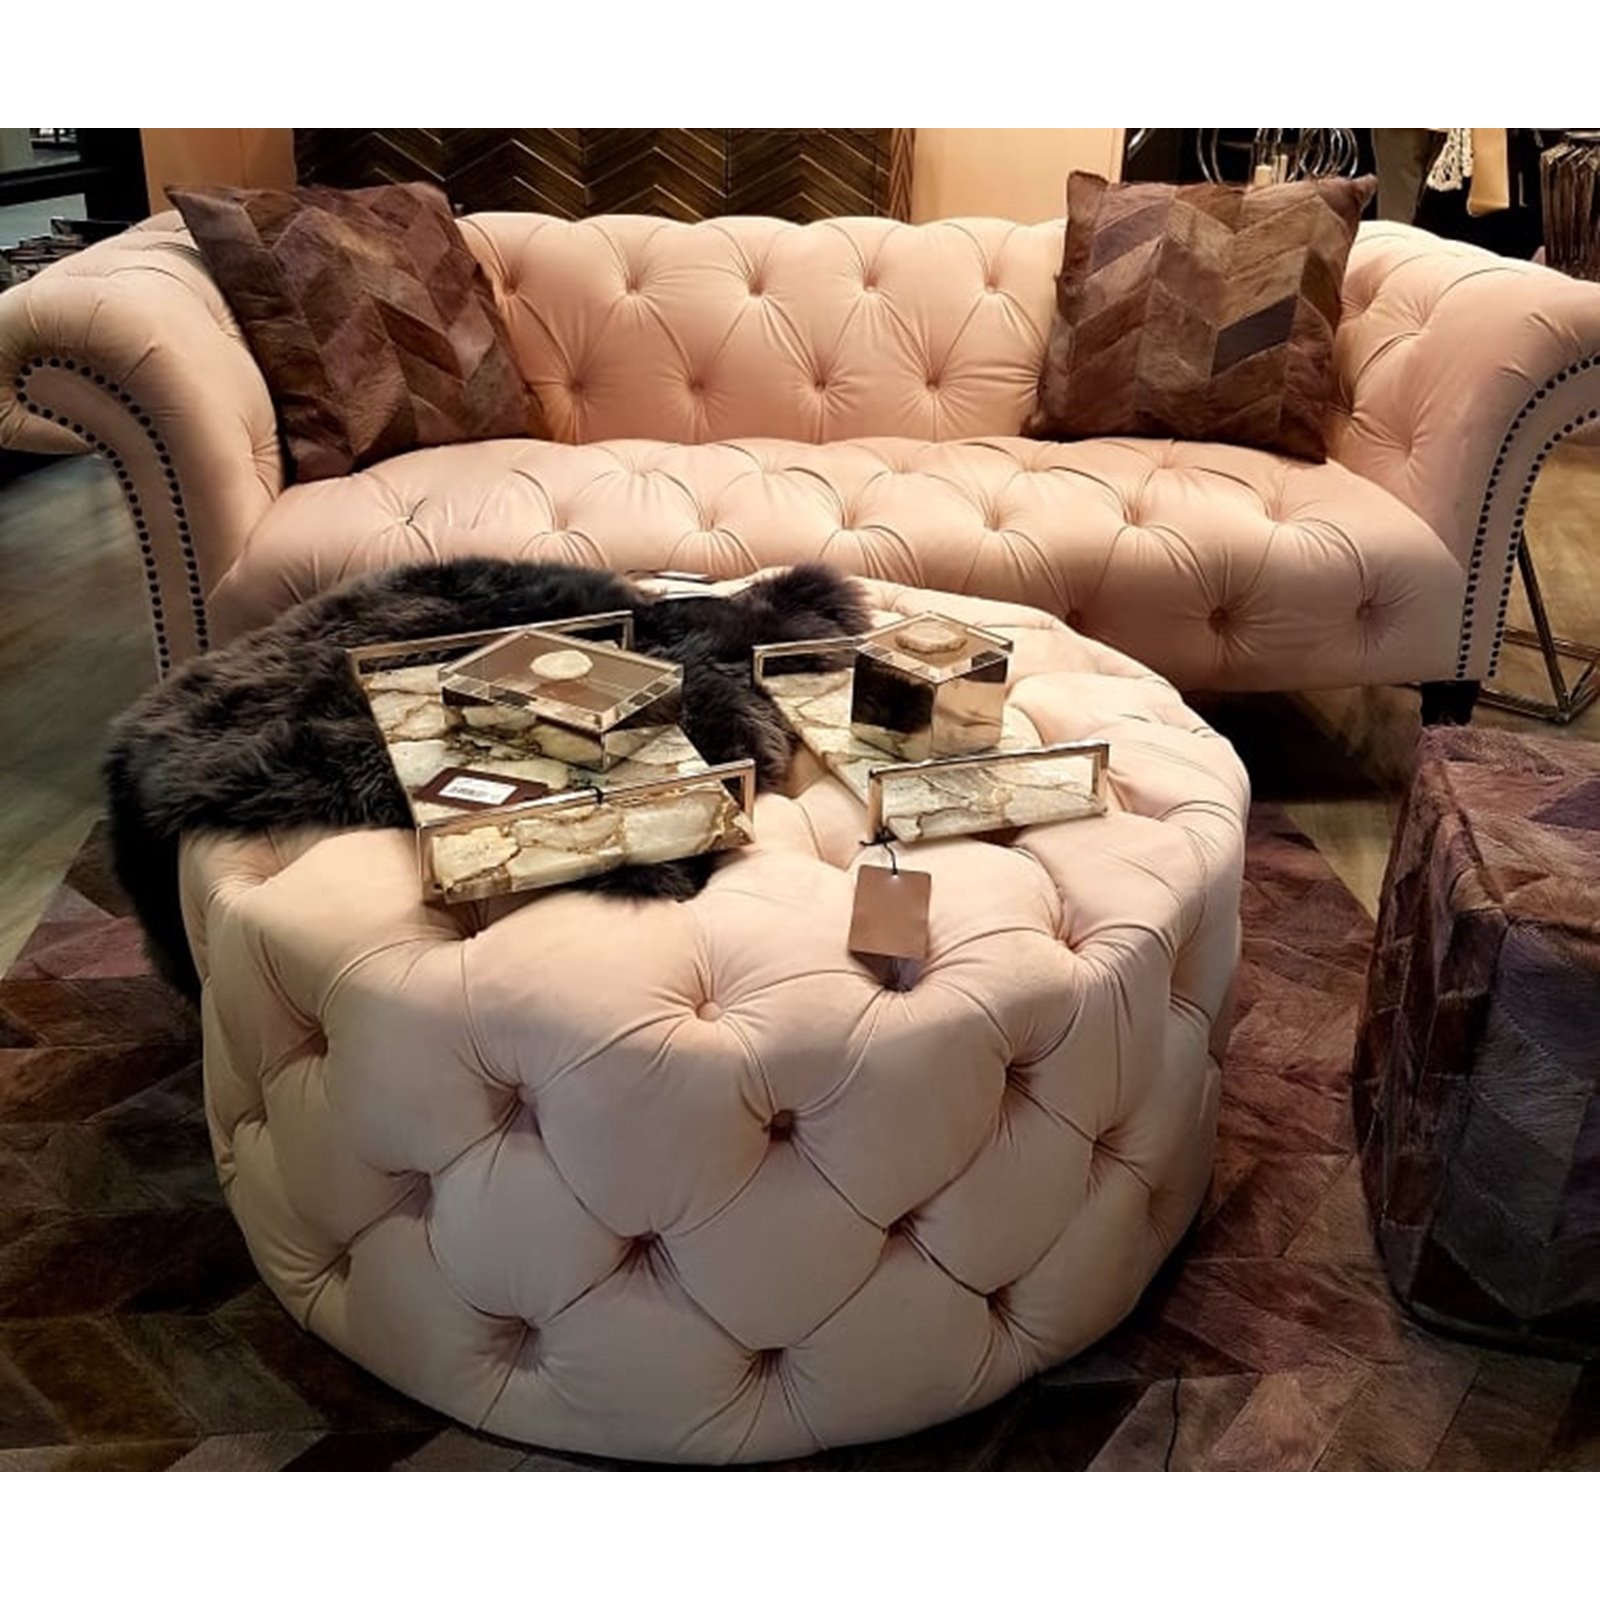 https://www.hicksandhicks.com/content/images/products/hicks-and-hicks/pale-pink-velvet-button-round-footstool/pale-pink-velvet-button-round-footstool_11805-initial.jpg